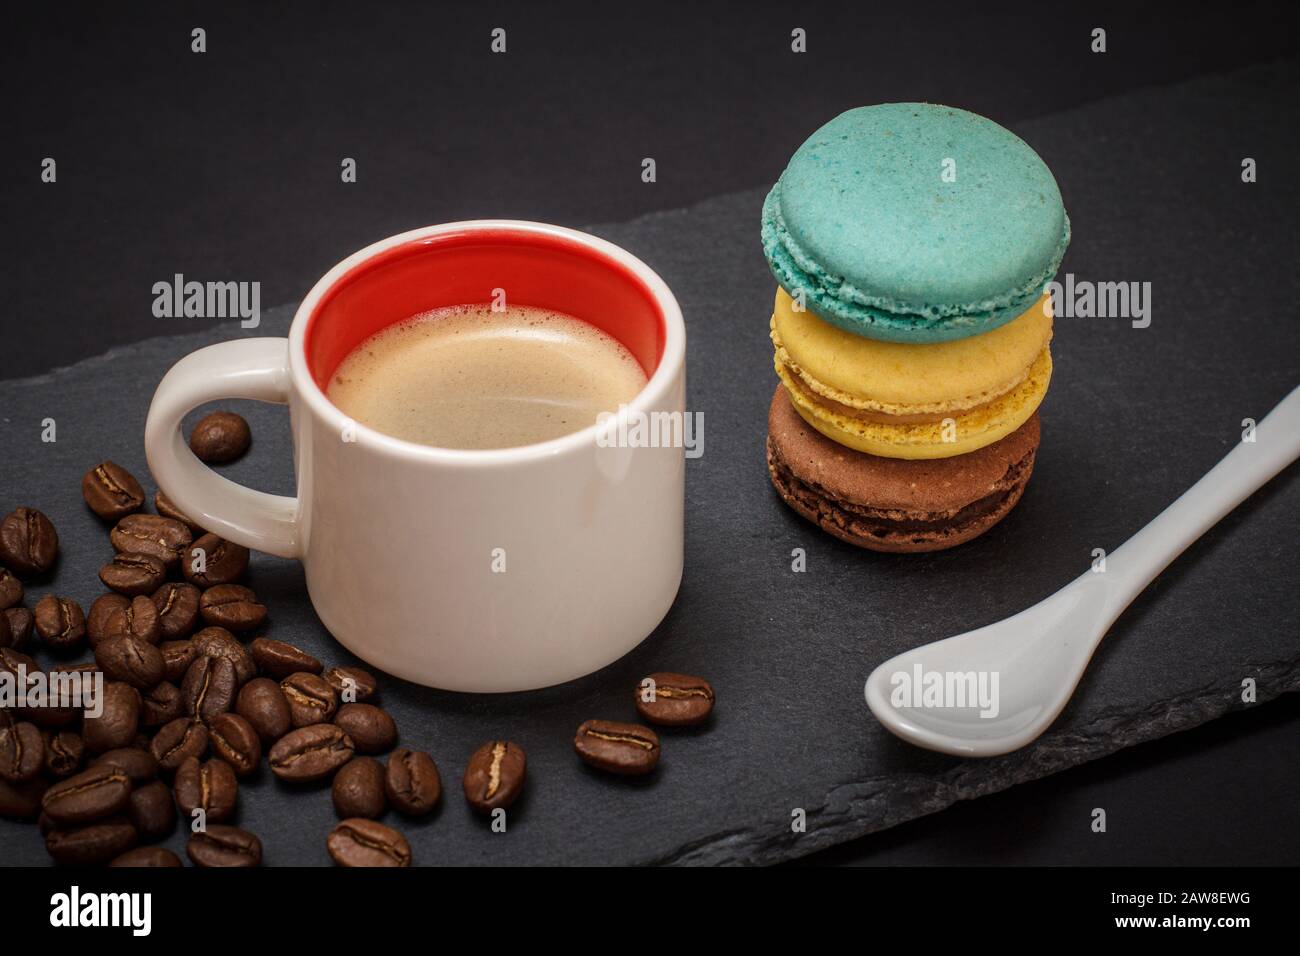 Cup of coffee, coffee beans, macaroons and spoon on black background. Top view. Stock Photo